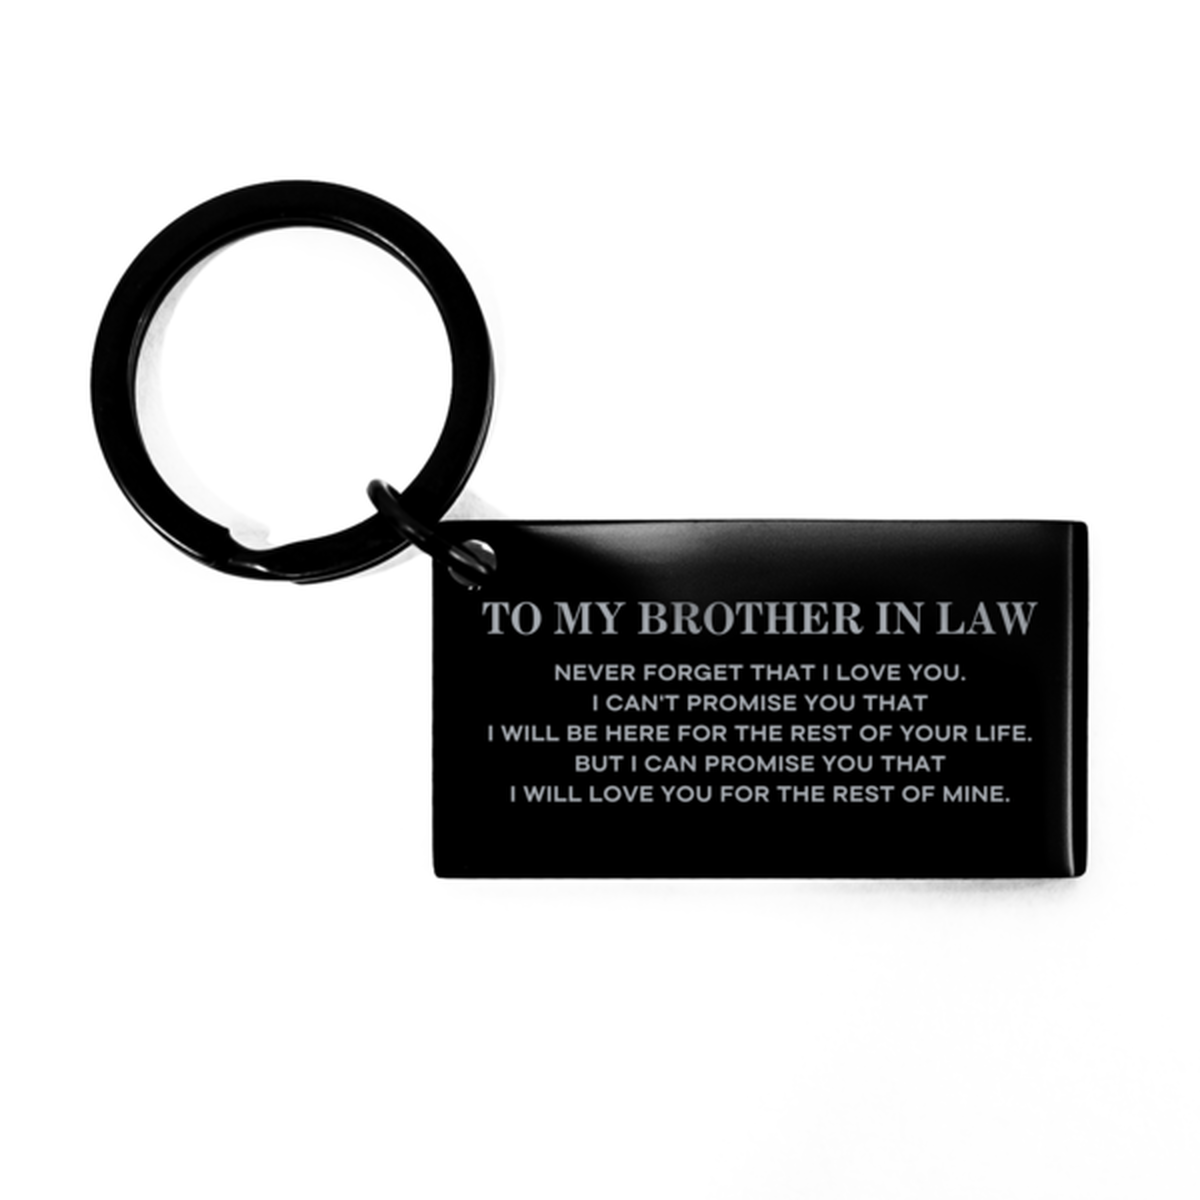 To My Brother In Law Gifts, I will love you for the rest of mine, Love Brother In Law Keychain, Birthday Christmas Unique Keychain For Brother In Law